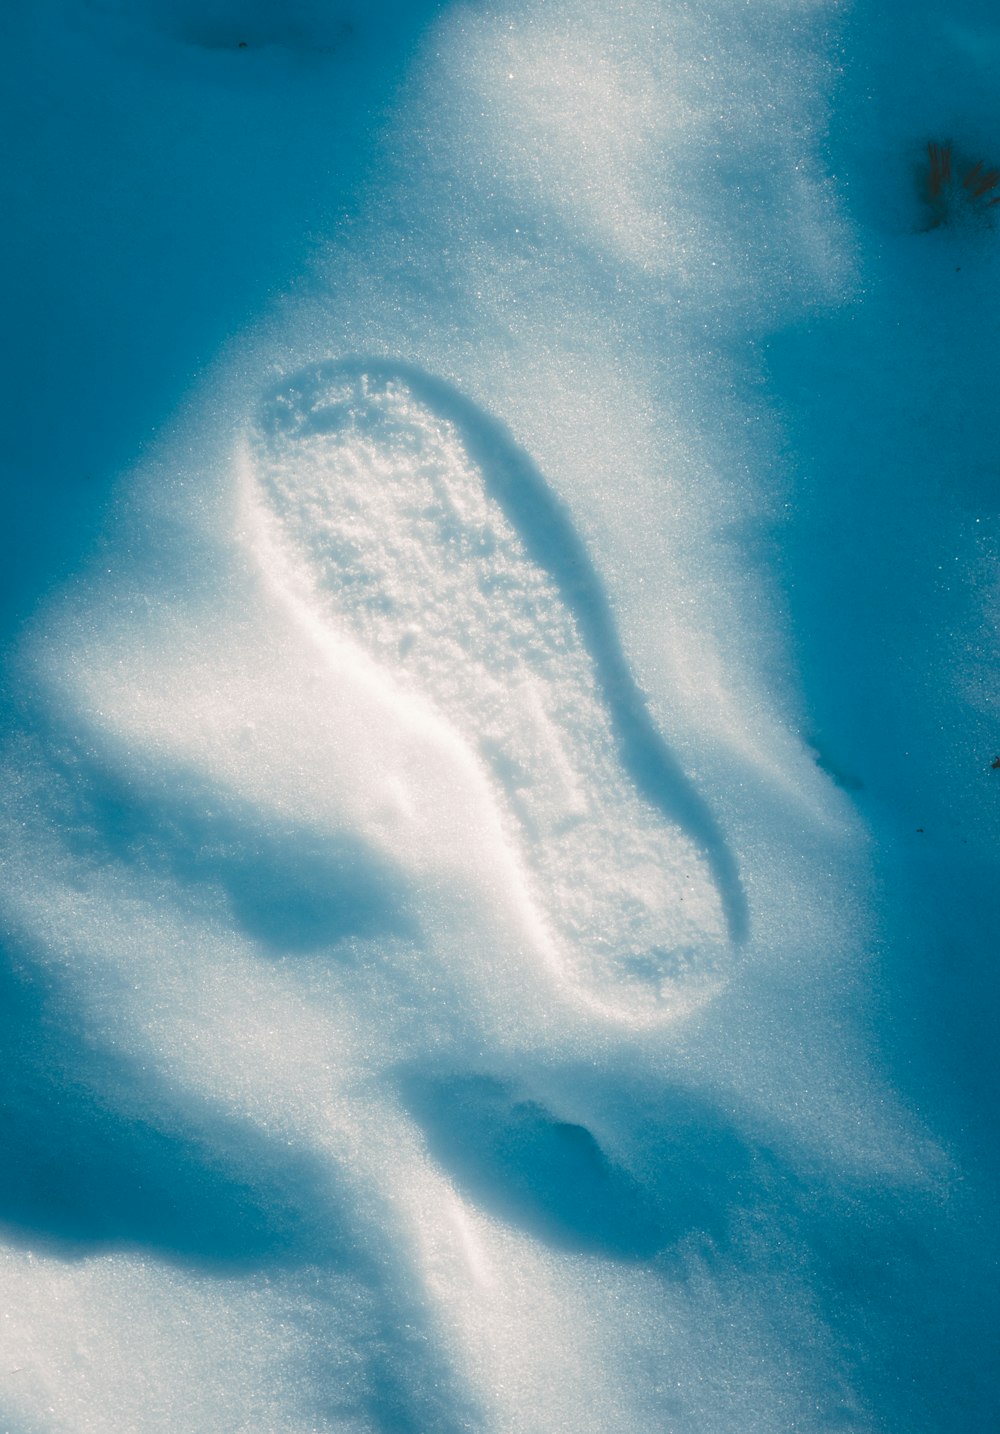 a snow covered ground with a snow shoe imprint in the snow